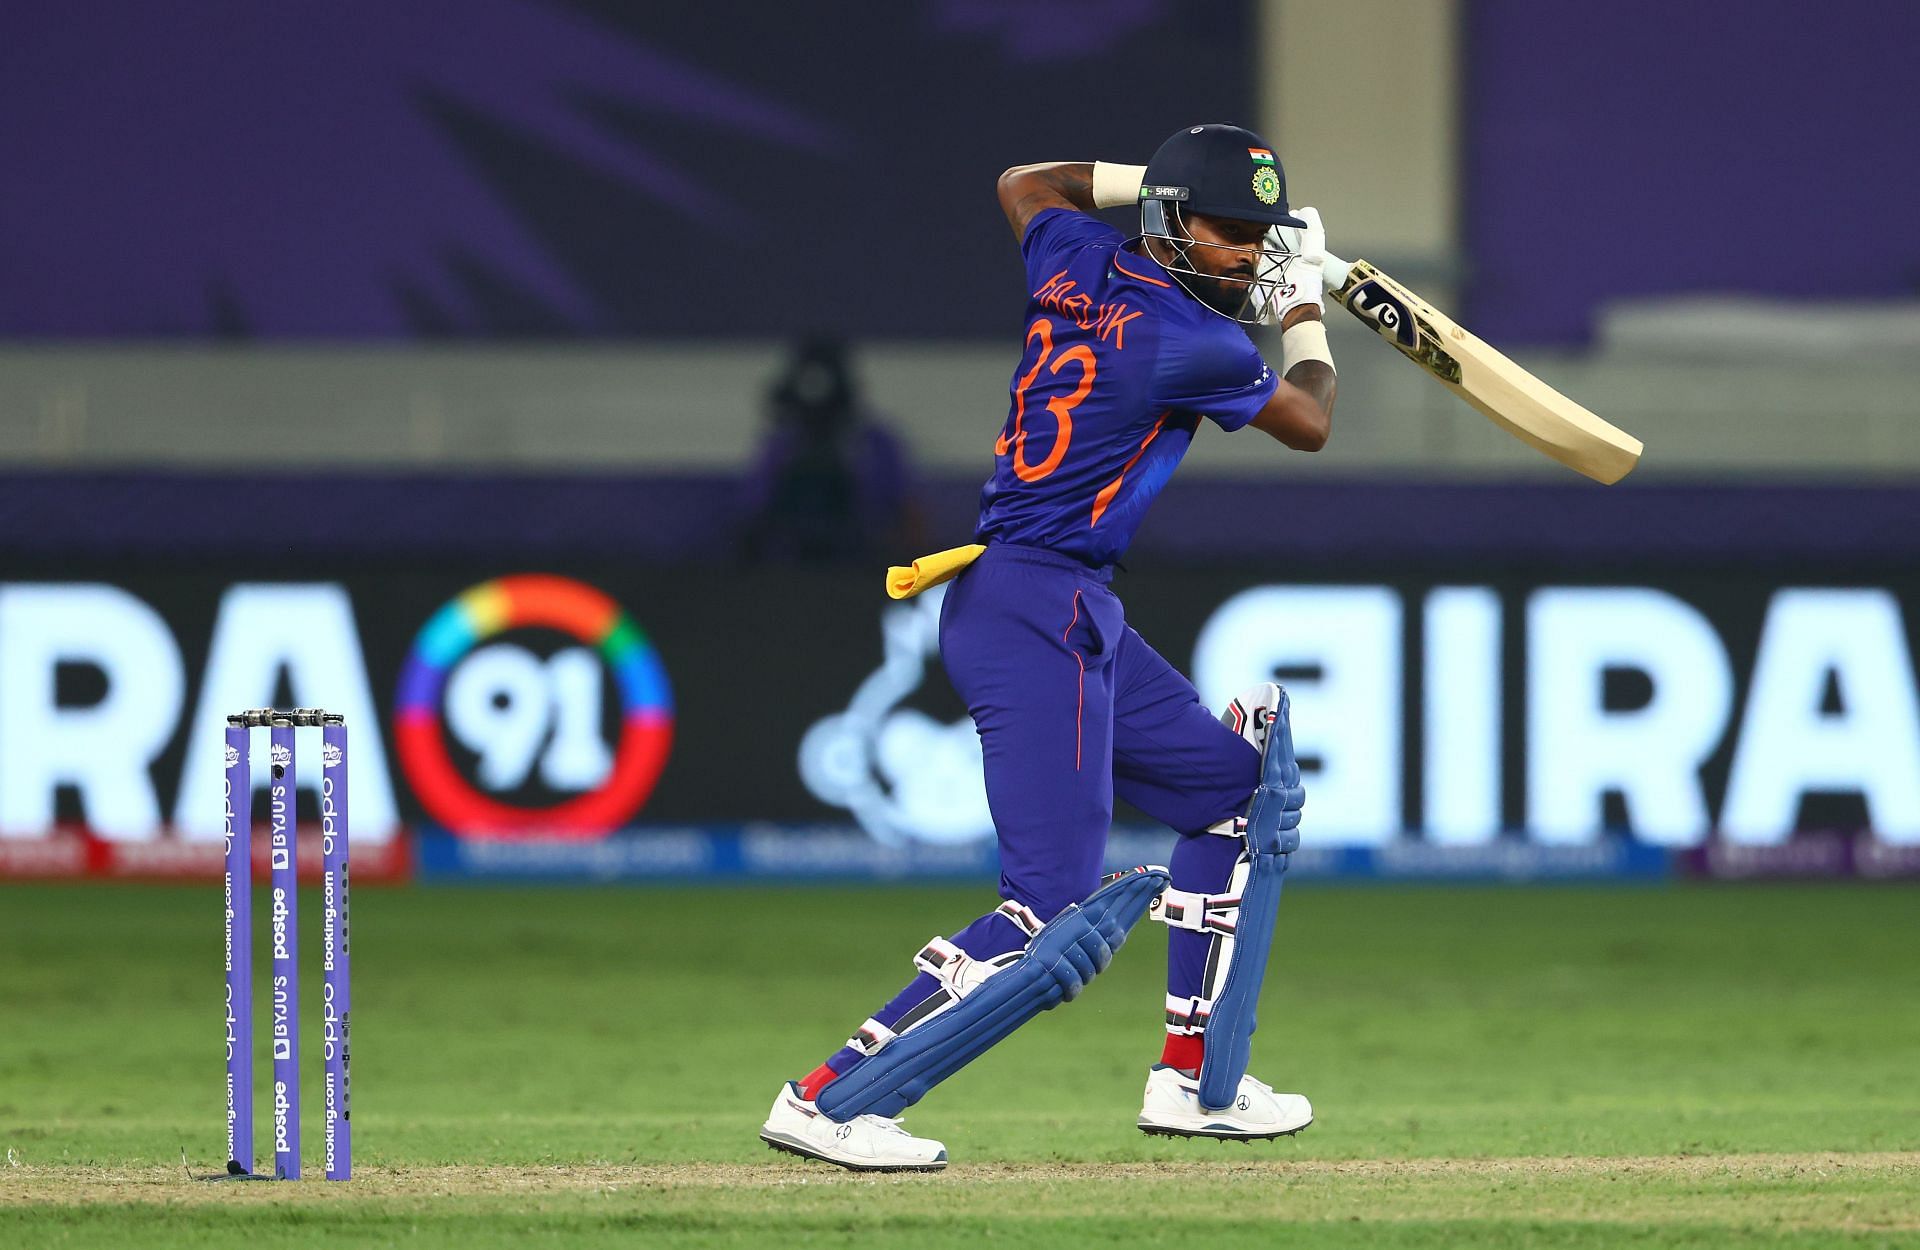 Hardik Pandya was not at his best in the T20 World Cup 2021 match against Pakistan